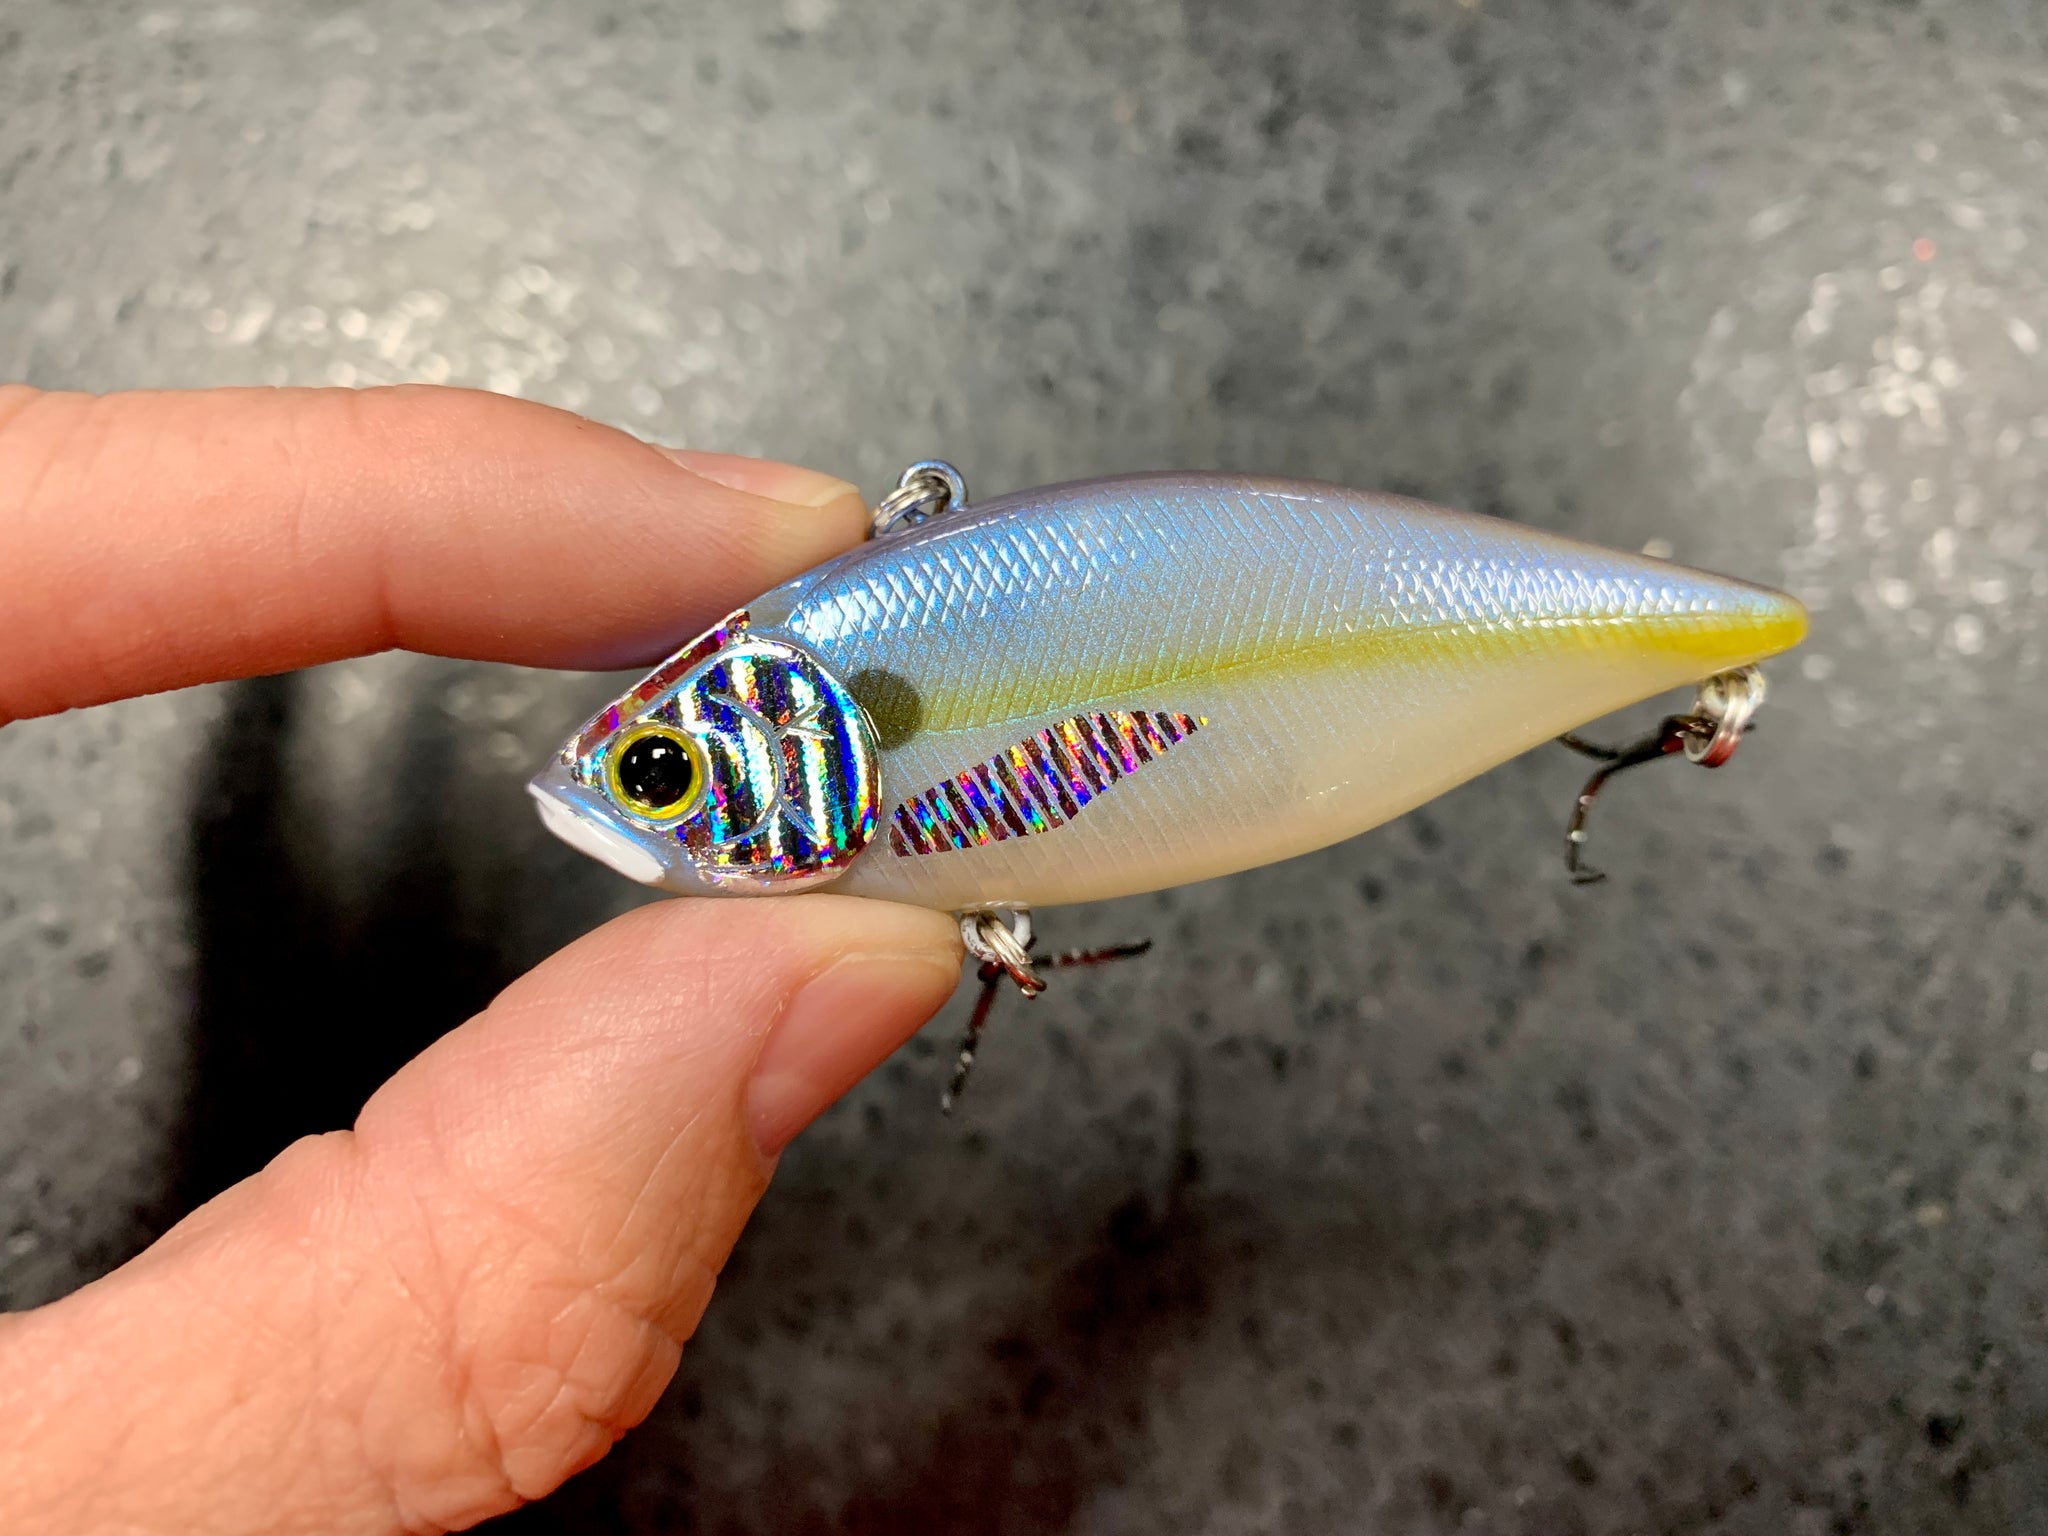 Lucky Craft LV 500 Lipless Crankbait Chartreuse Shad